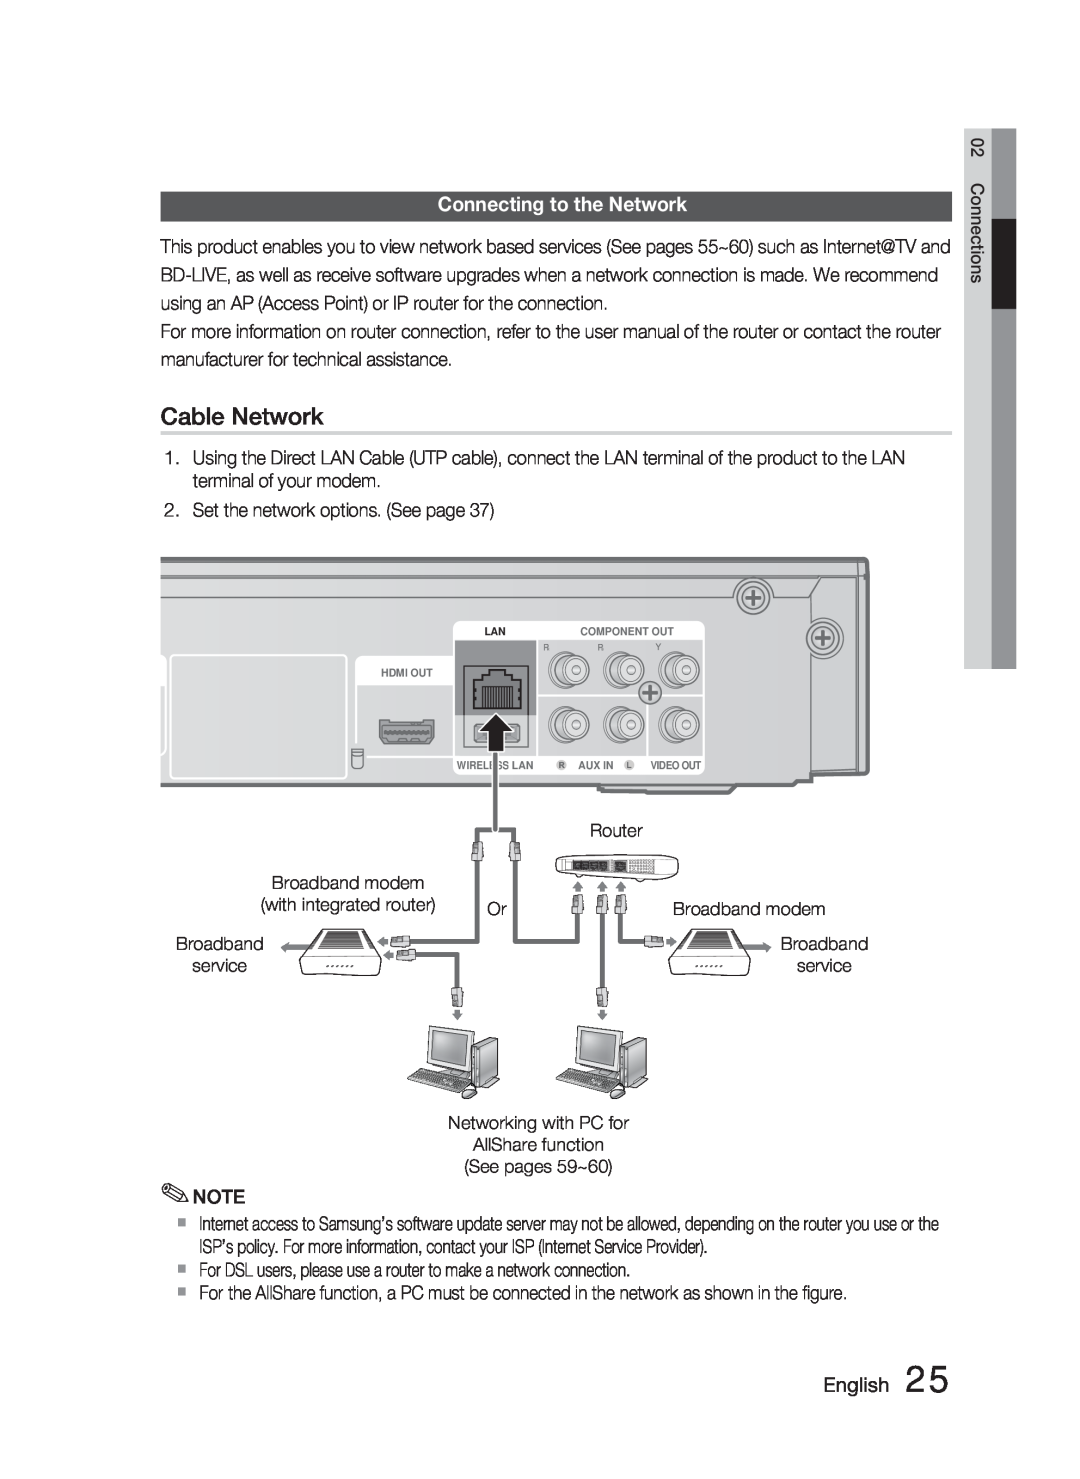 Samsung HT-C5500 user manual Cable Network, Connecting to the Network, English 